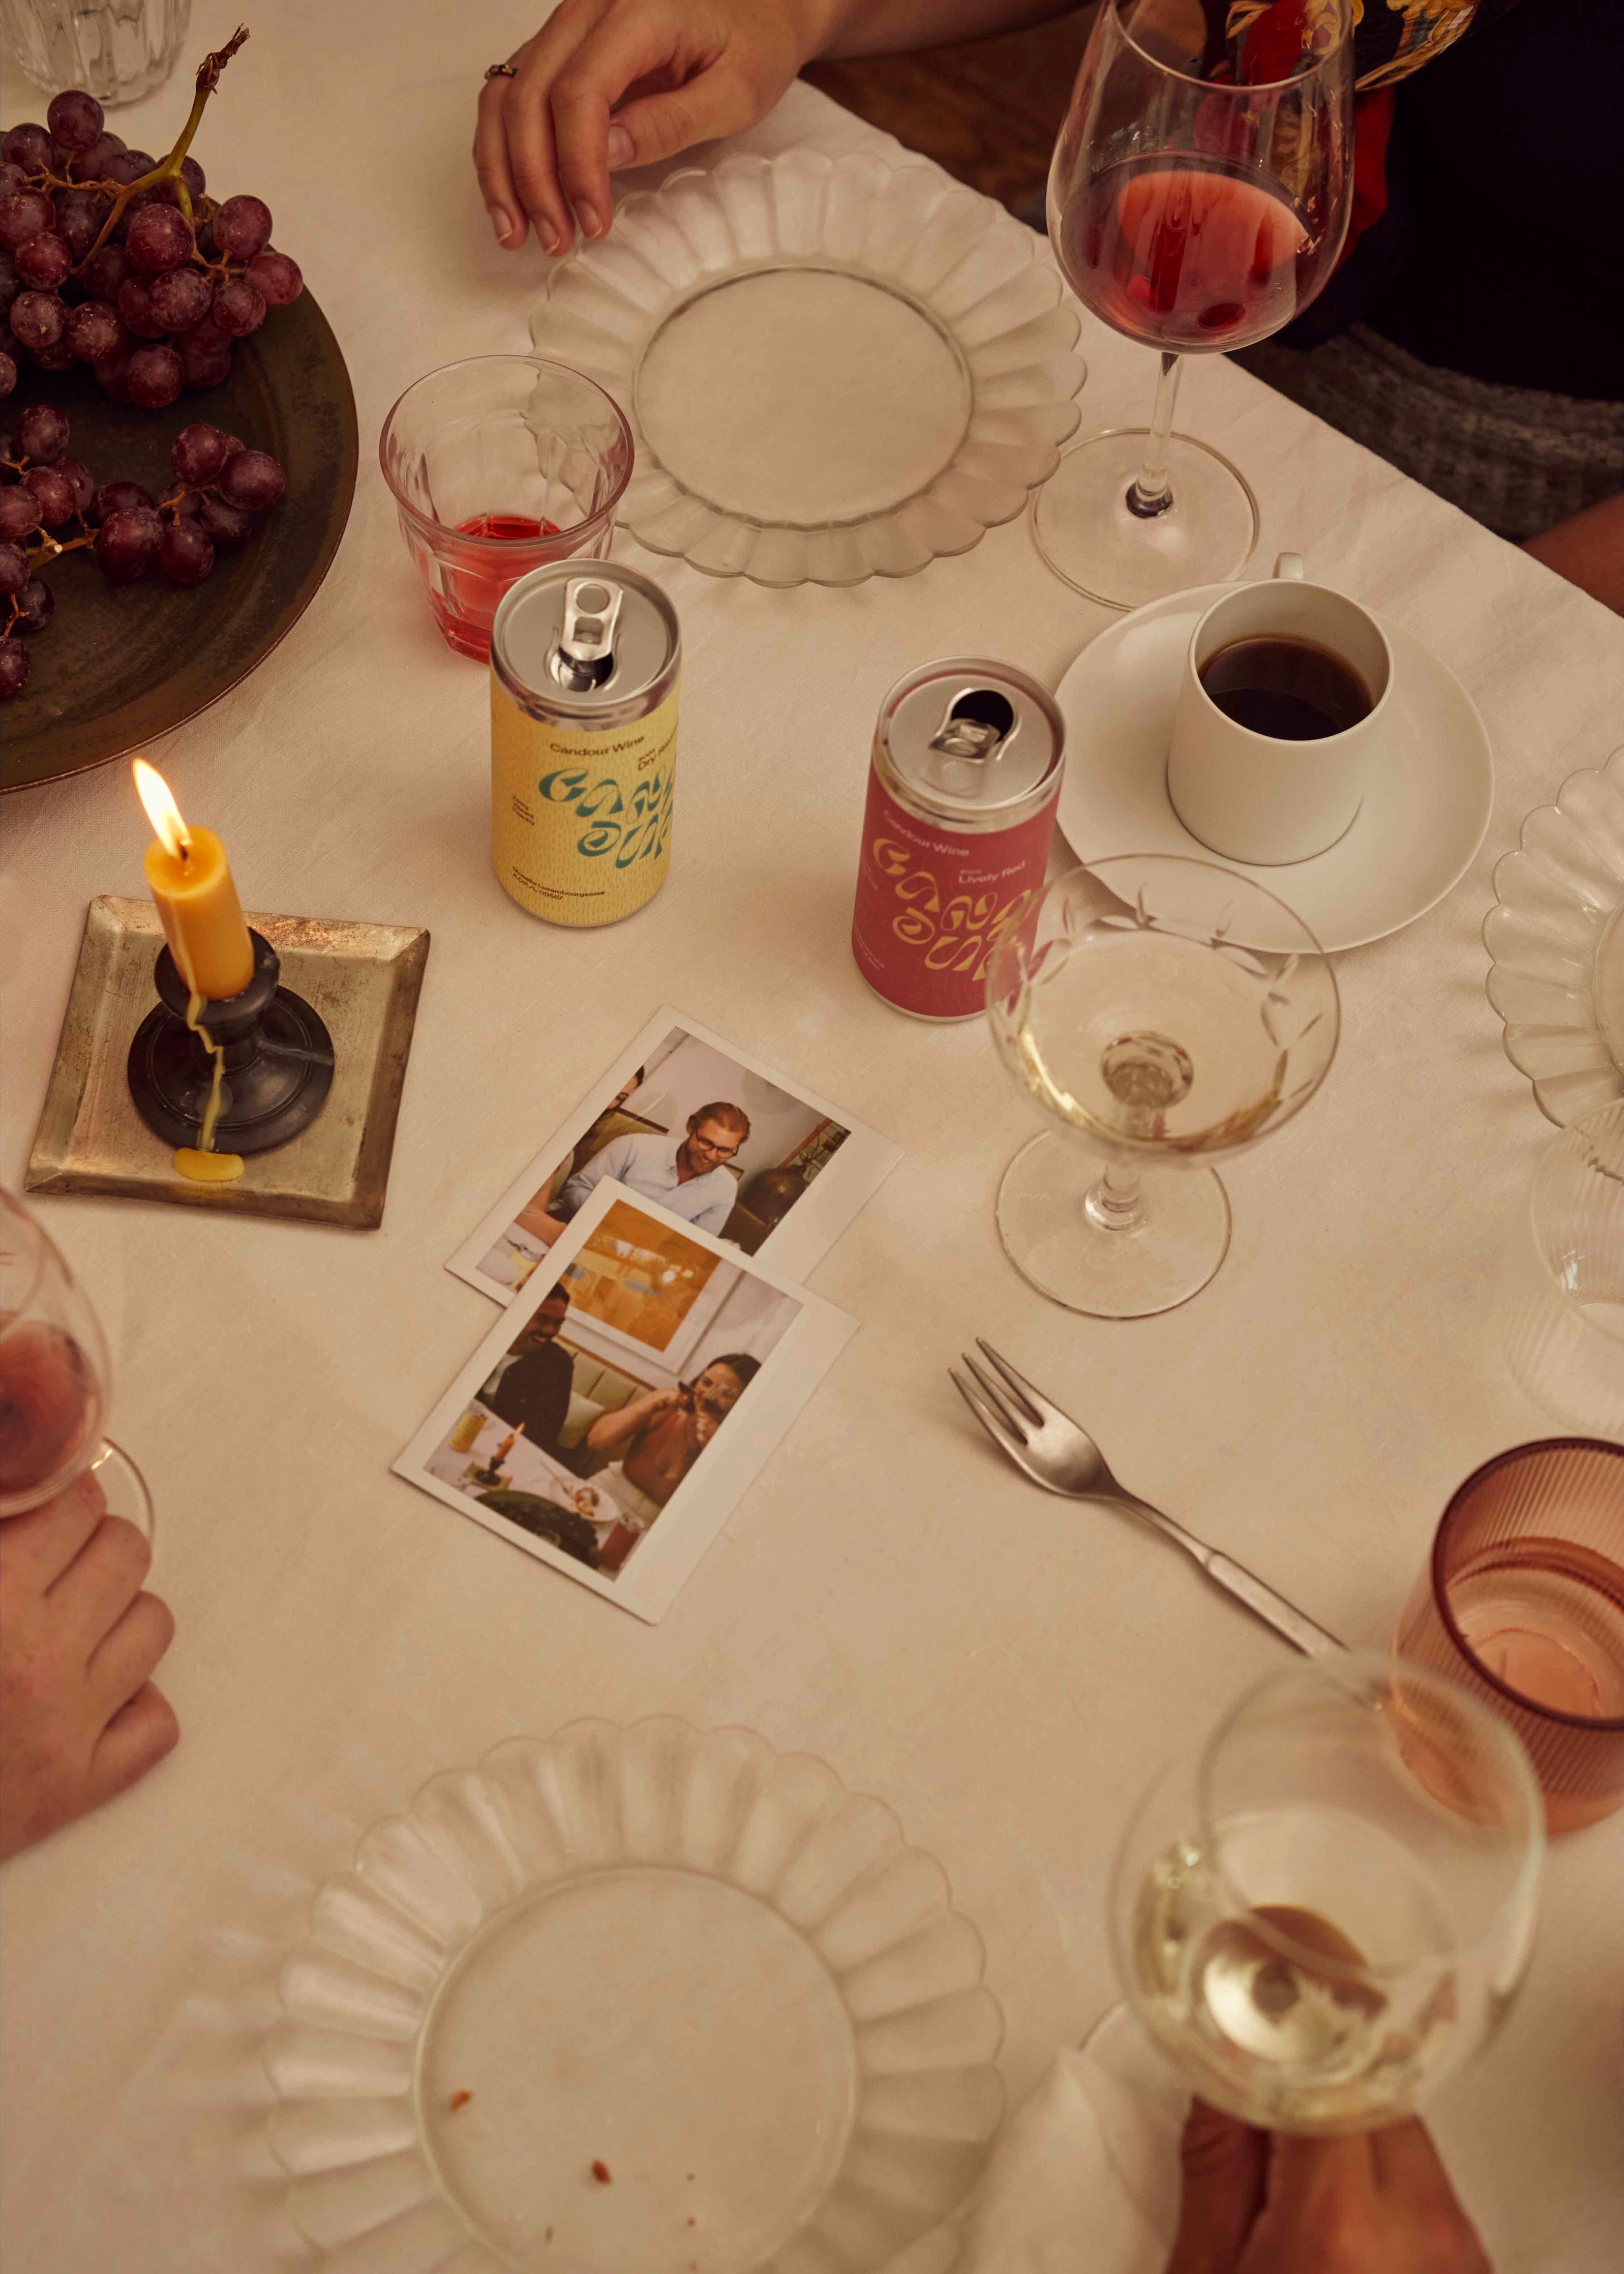 A can of red and a can of white wine on the table, with a poured glass of white wine and two polaroid pictures of friends.